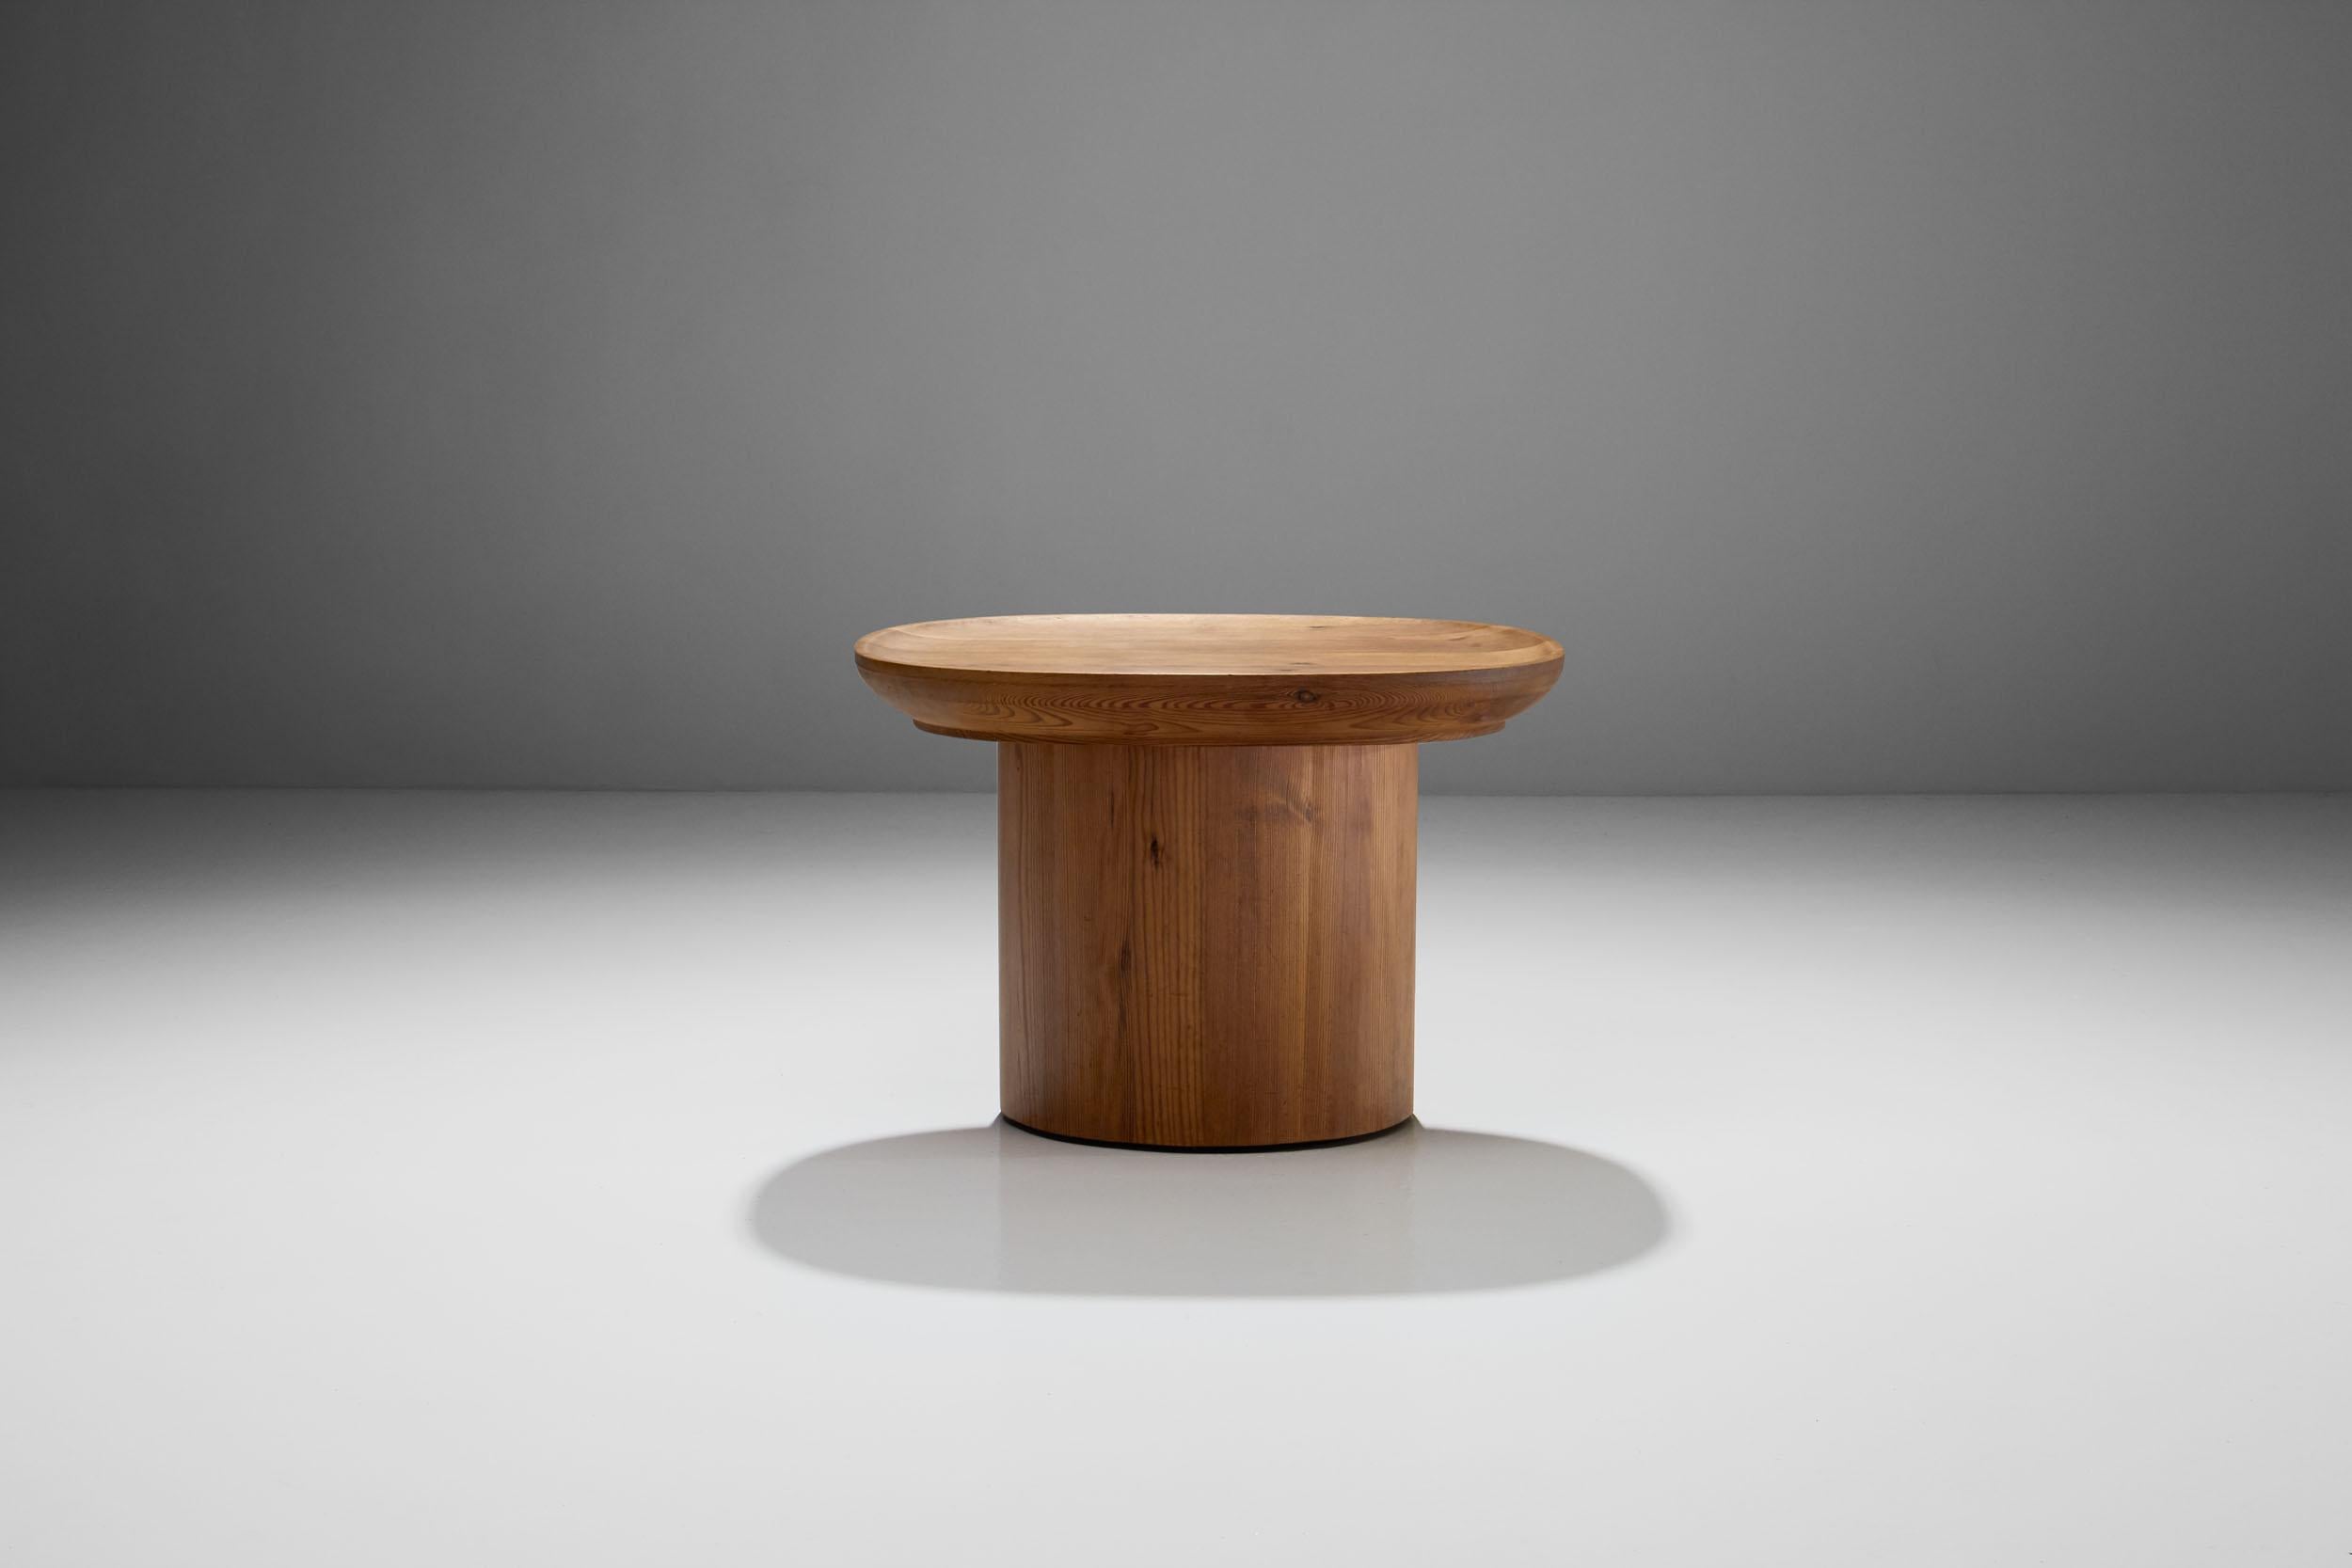 The ‘Utö’ coffee table designed by Axel Einar Hjorth is striking in balancing large volumes with clean geometrical lines. The tabletop has a thick and oval shaped shallow bowl with a well-defined rim on the top and bottom. The pine wood has aged